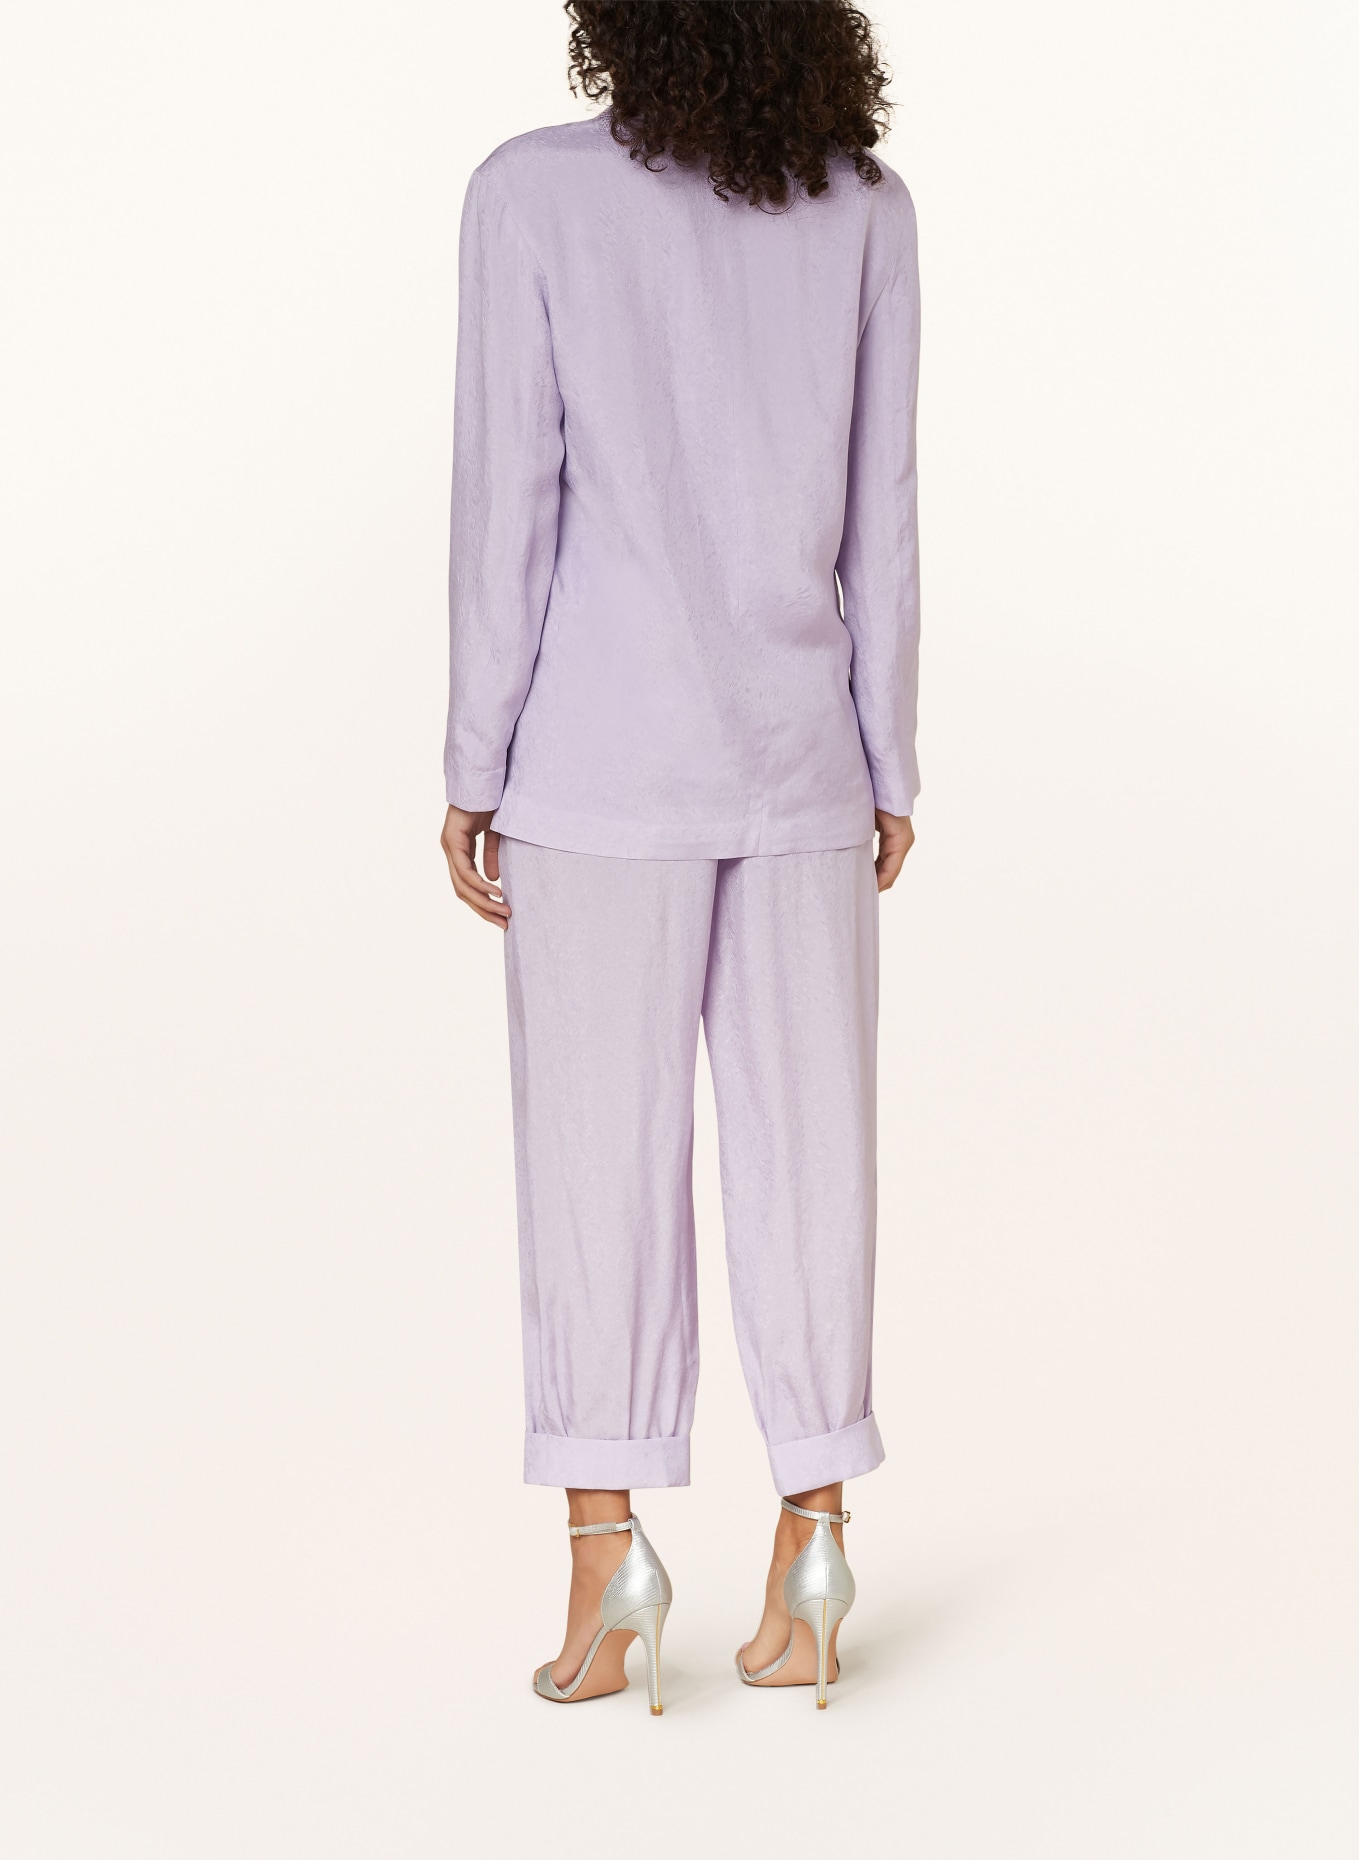 ARMANI EXCHANGE 7/8 trousers made of satin, Color: LIGHT PURPLE (Image 3)